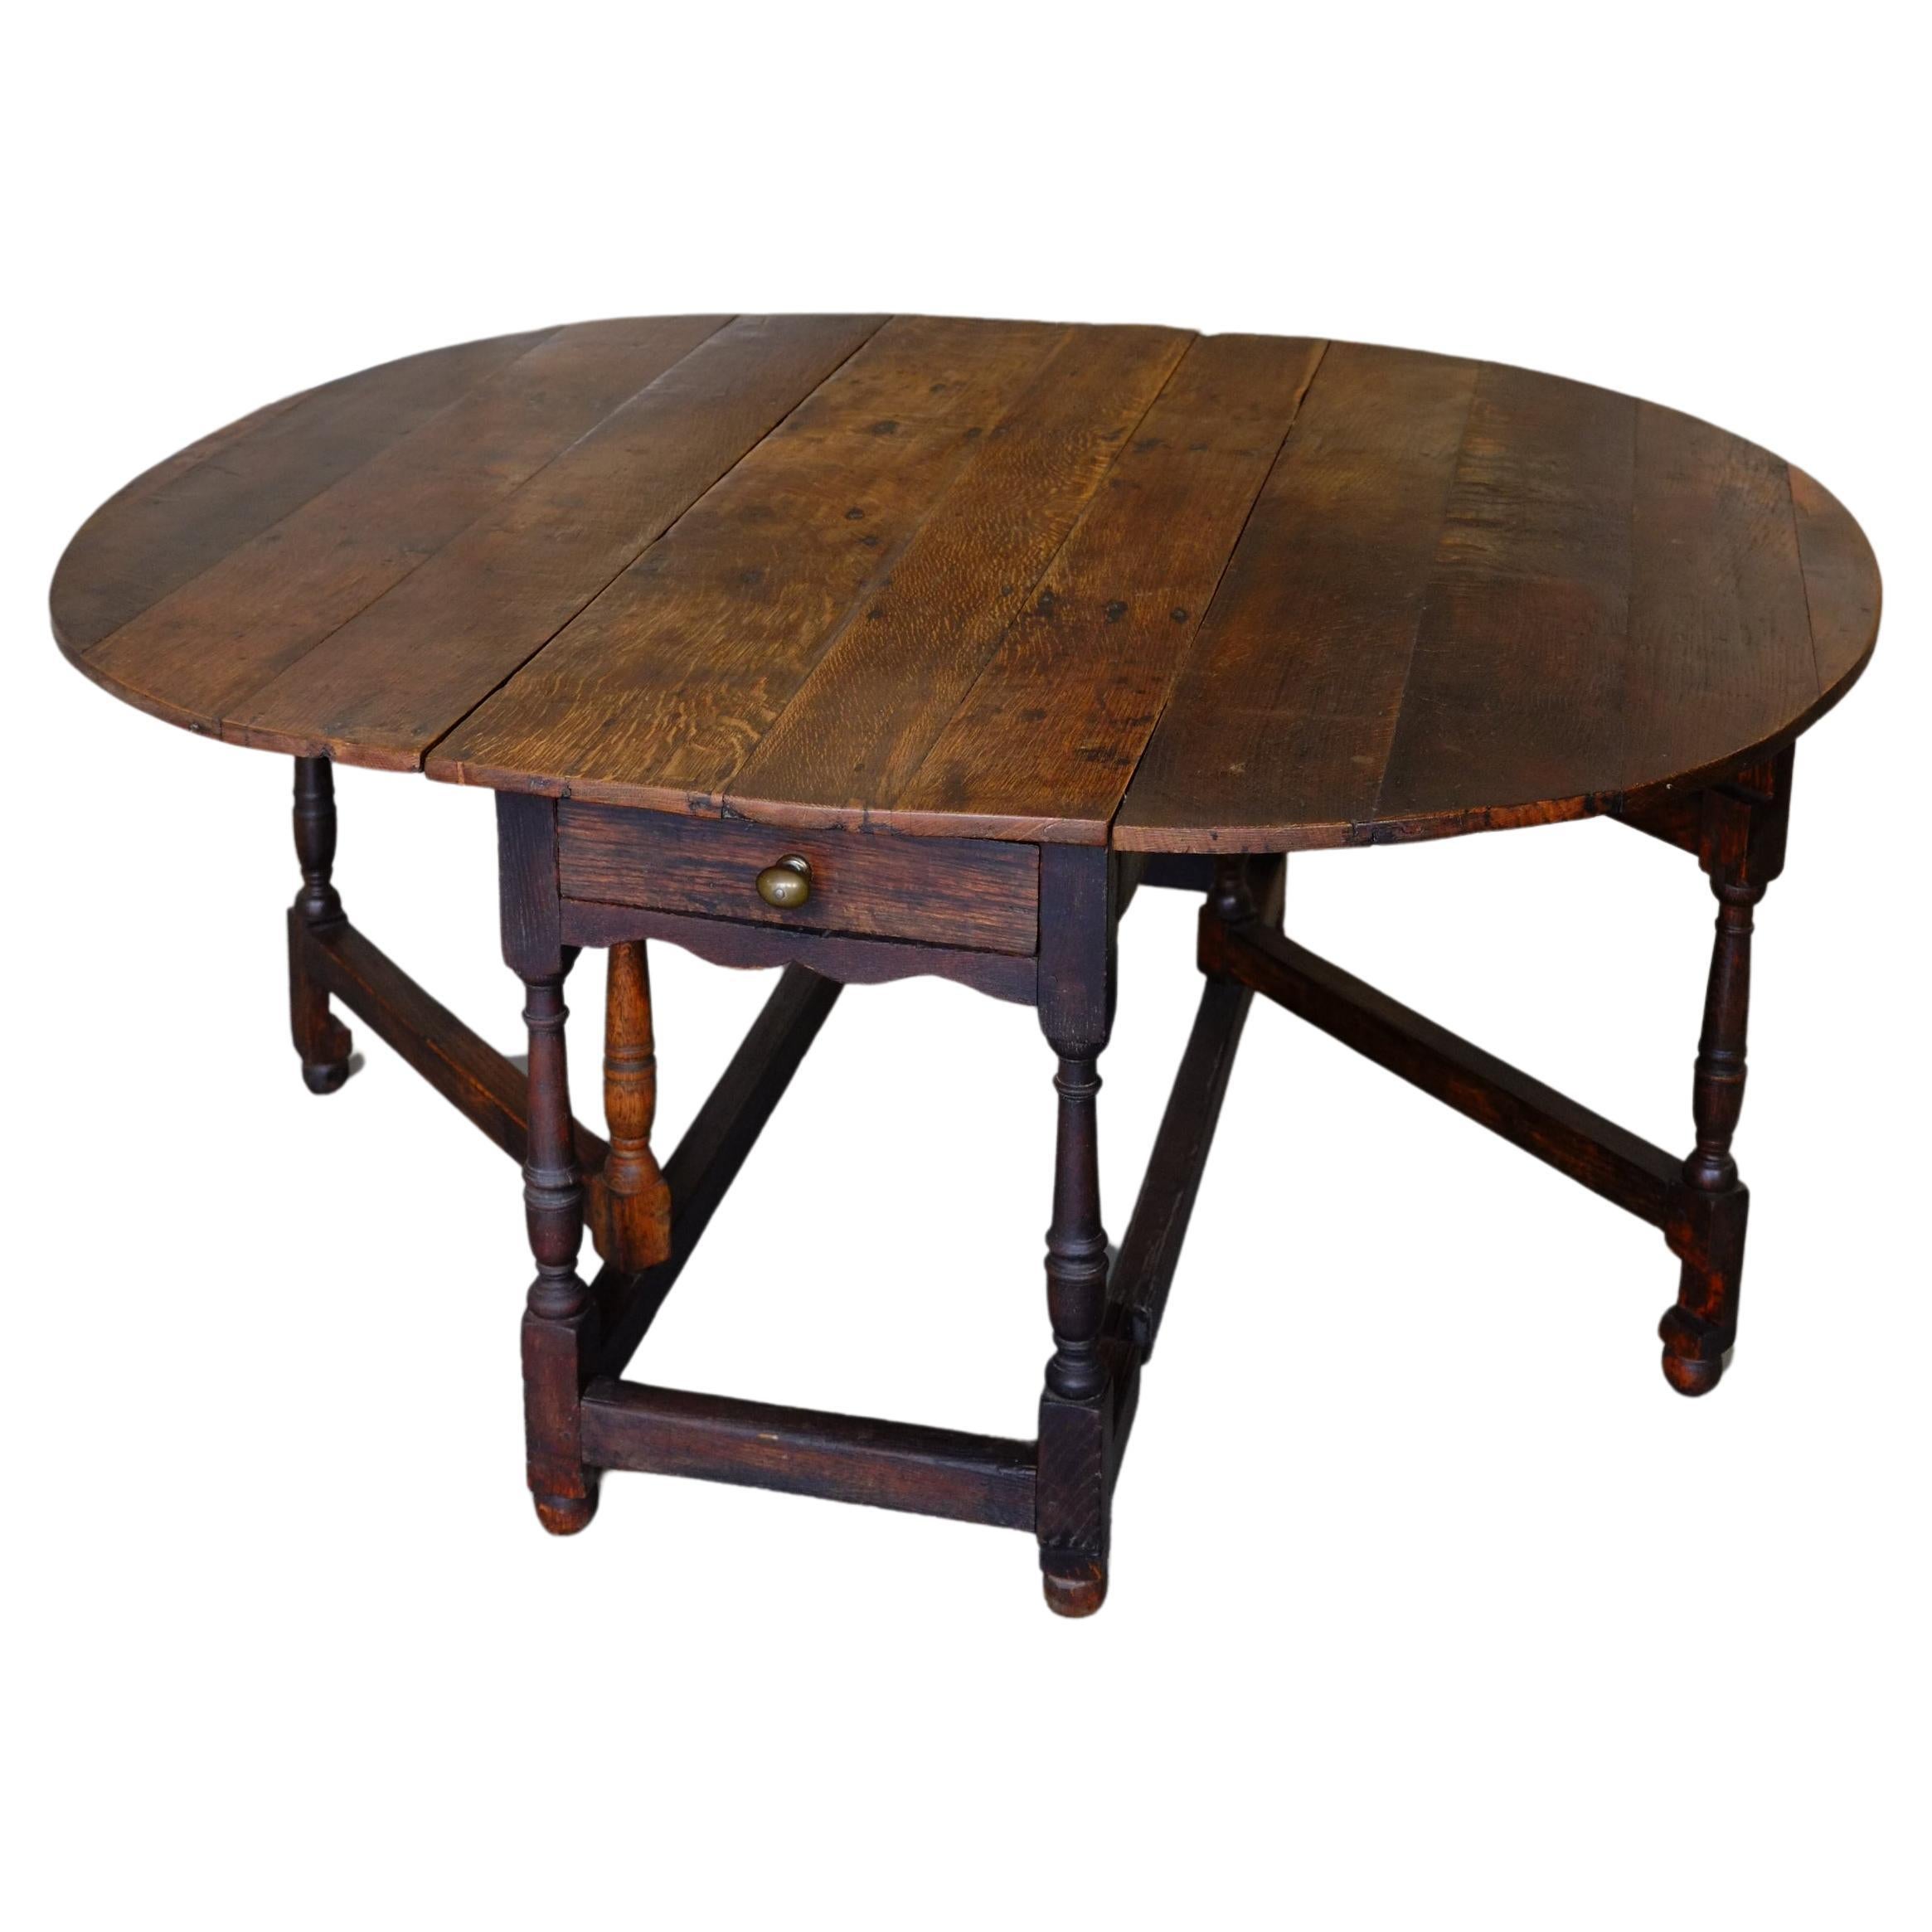 19th Century English Oak Plank Top, Drop Leaf, Large Wide Oval Dining Table For Sale